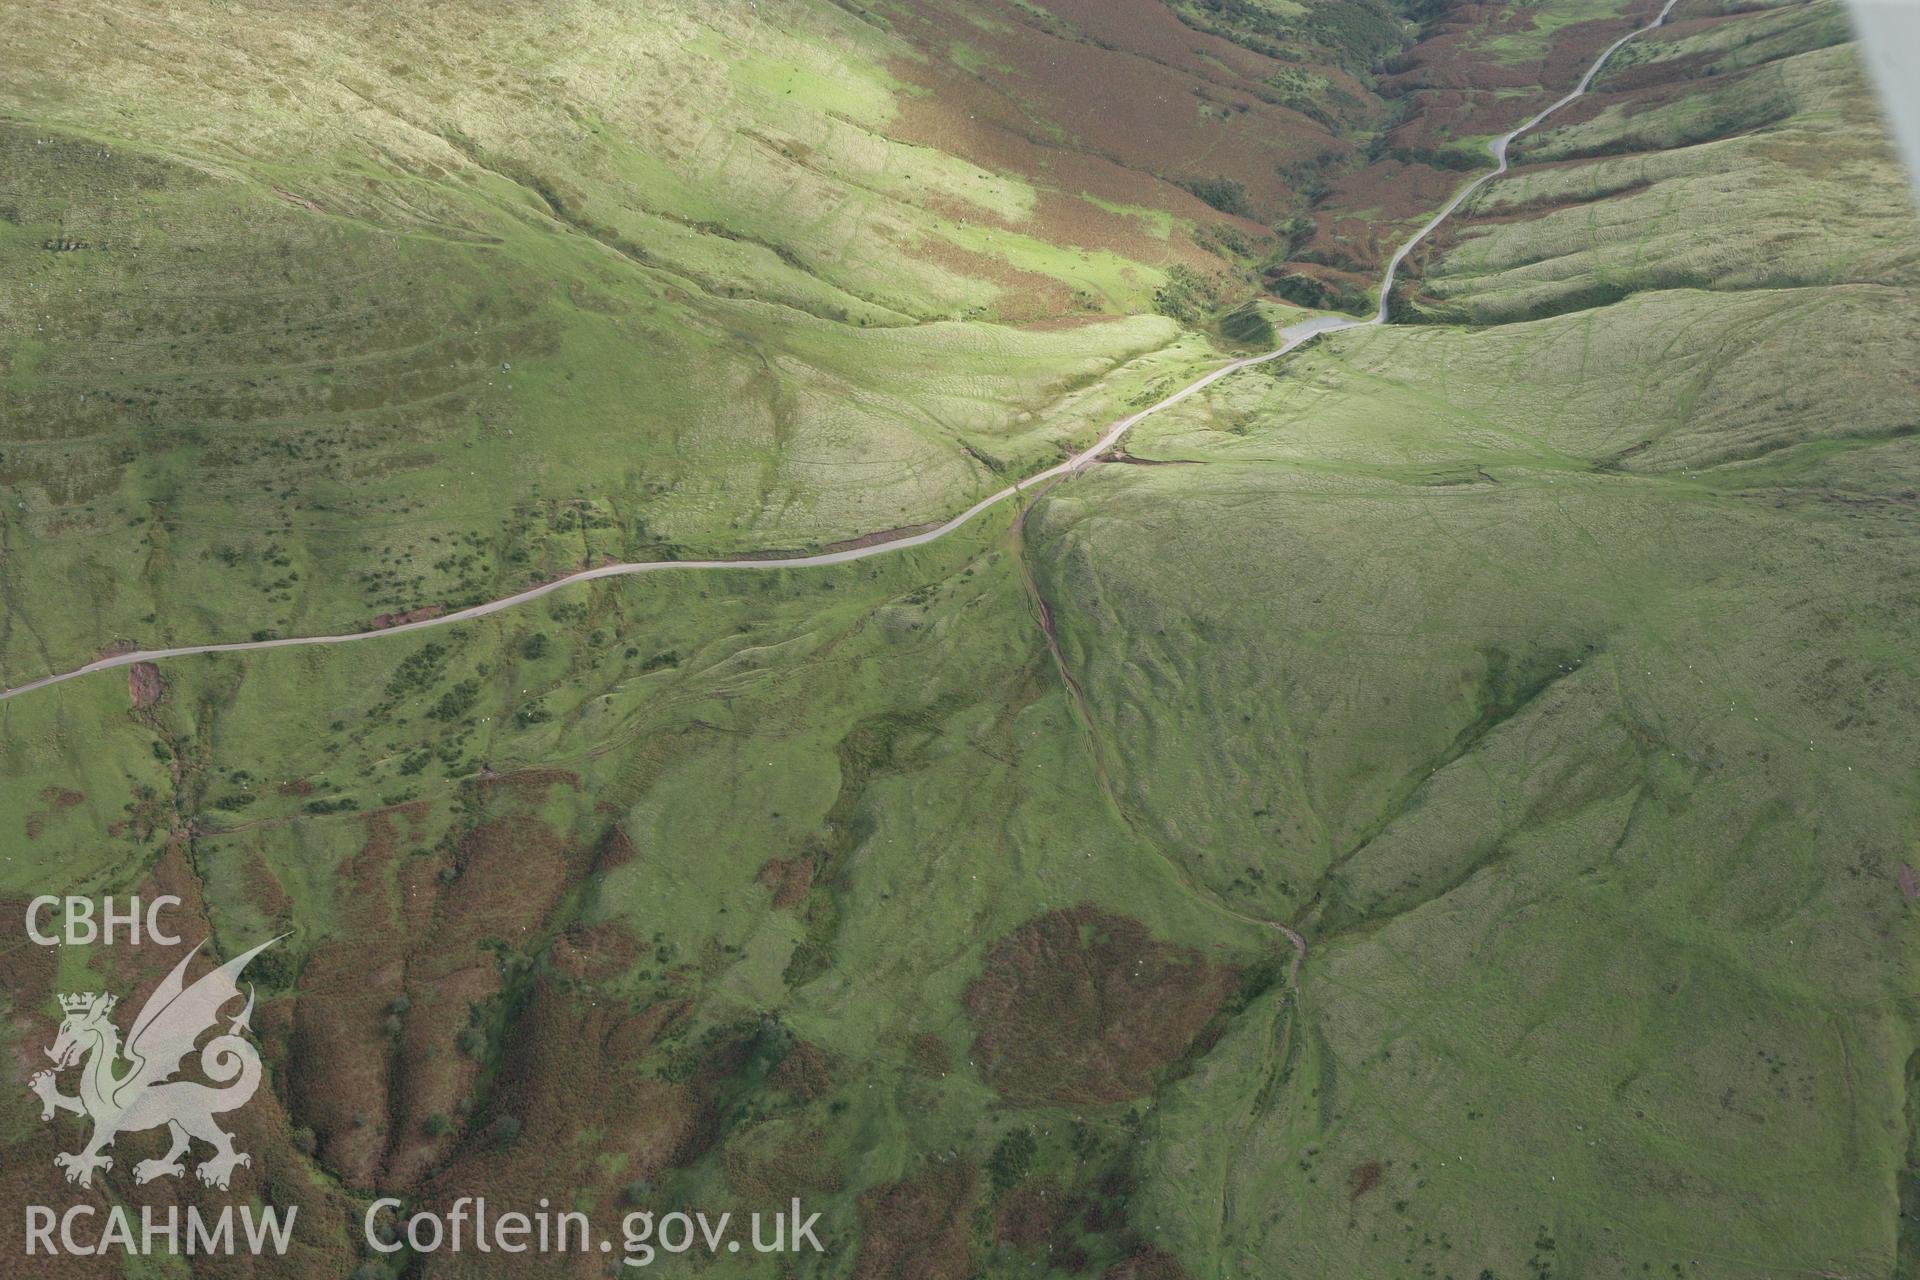 RCAHMW colour oblique photograph of braided trackway, Gospel Pass. Taken by Toby Driver on 10/10/2008.